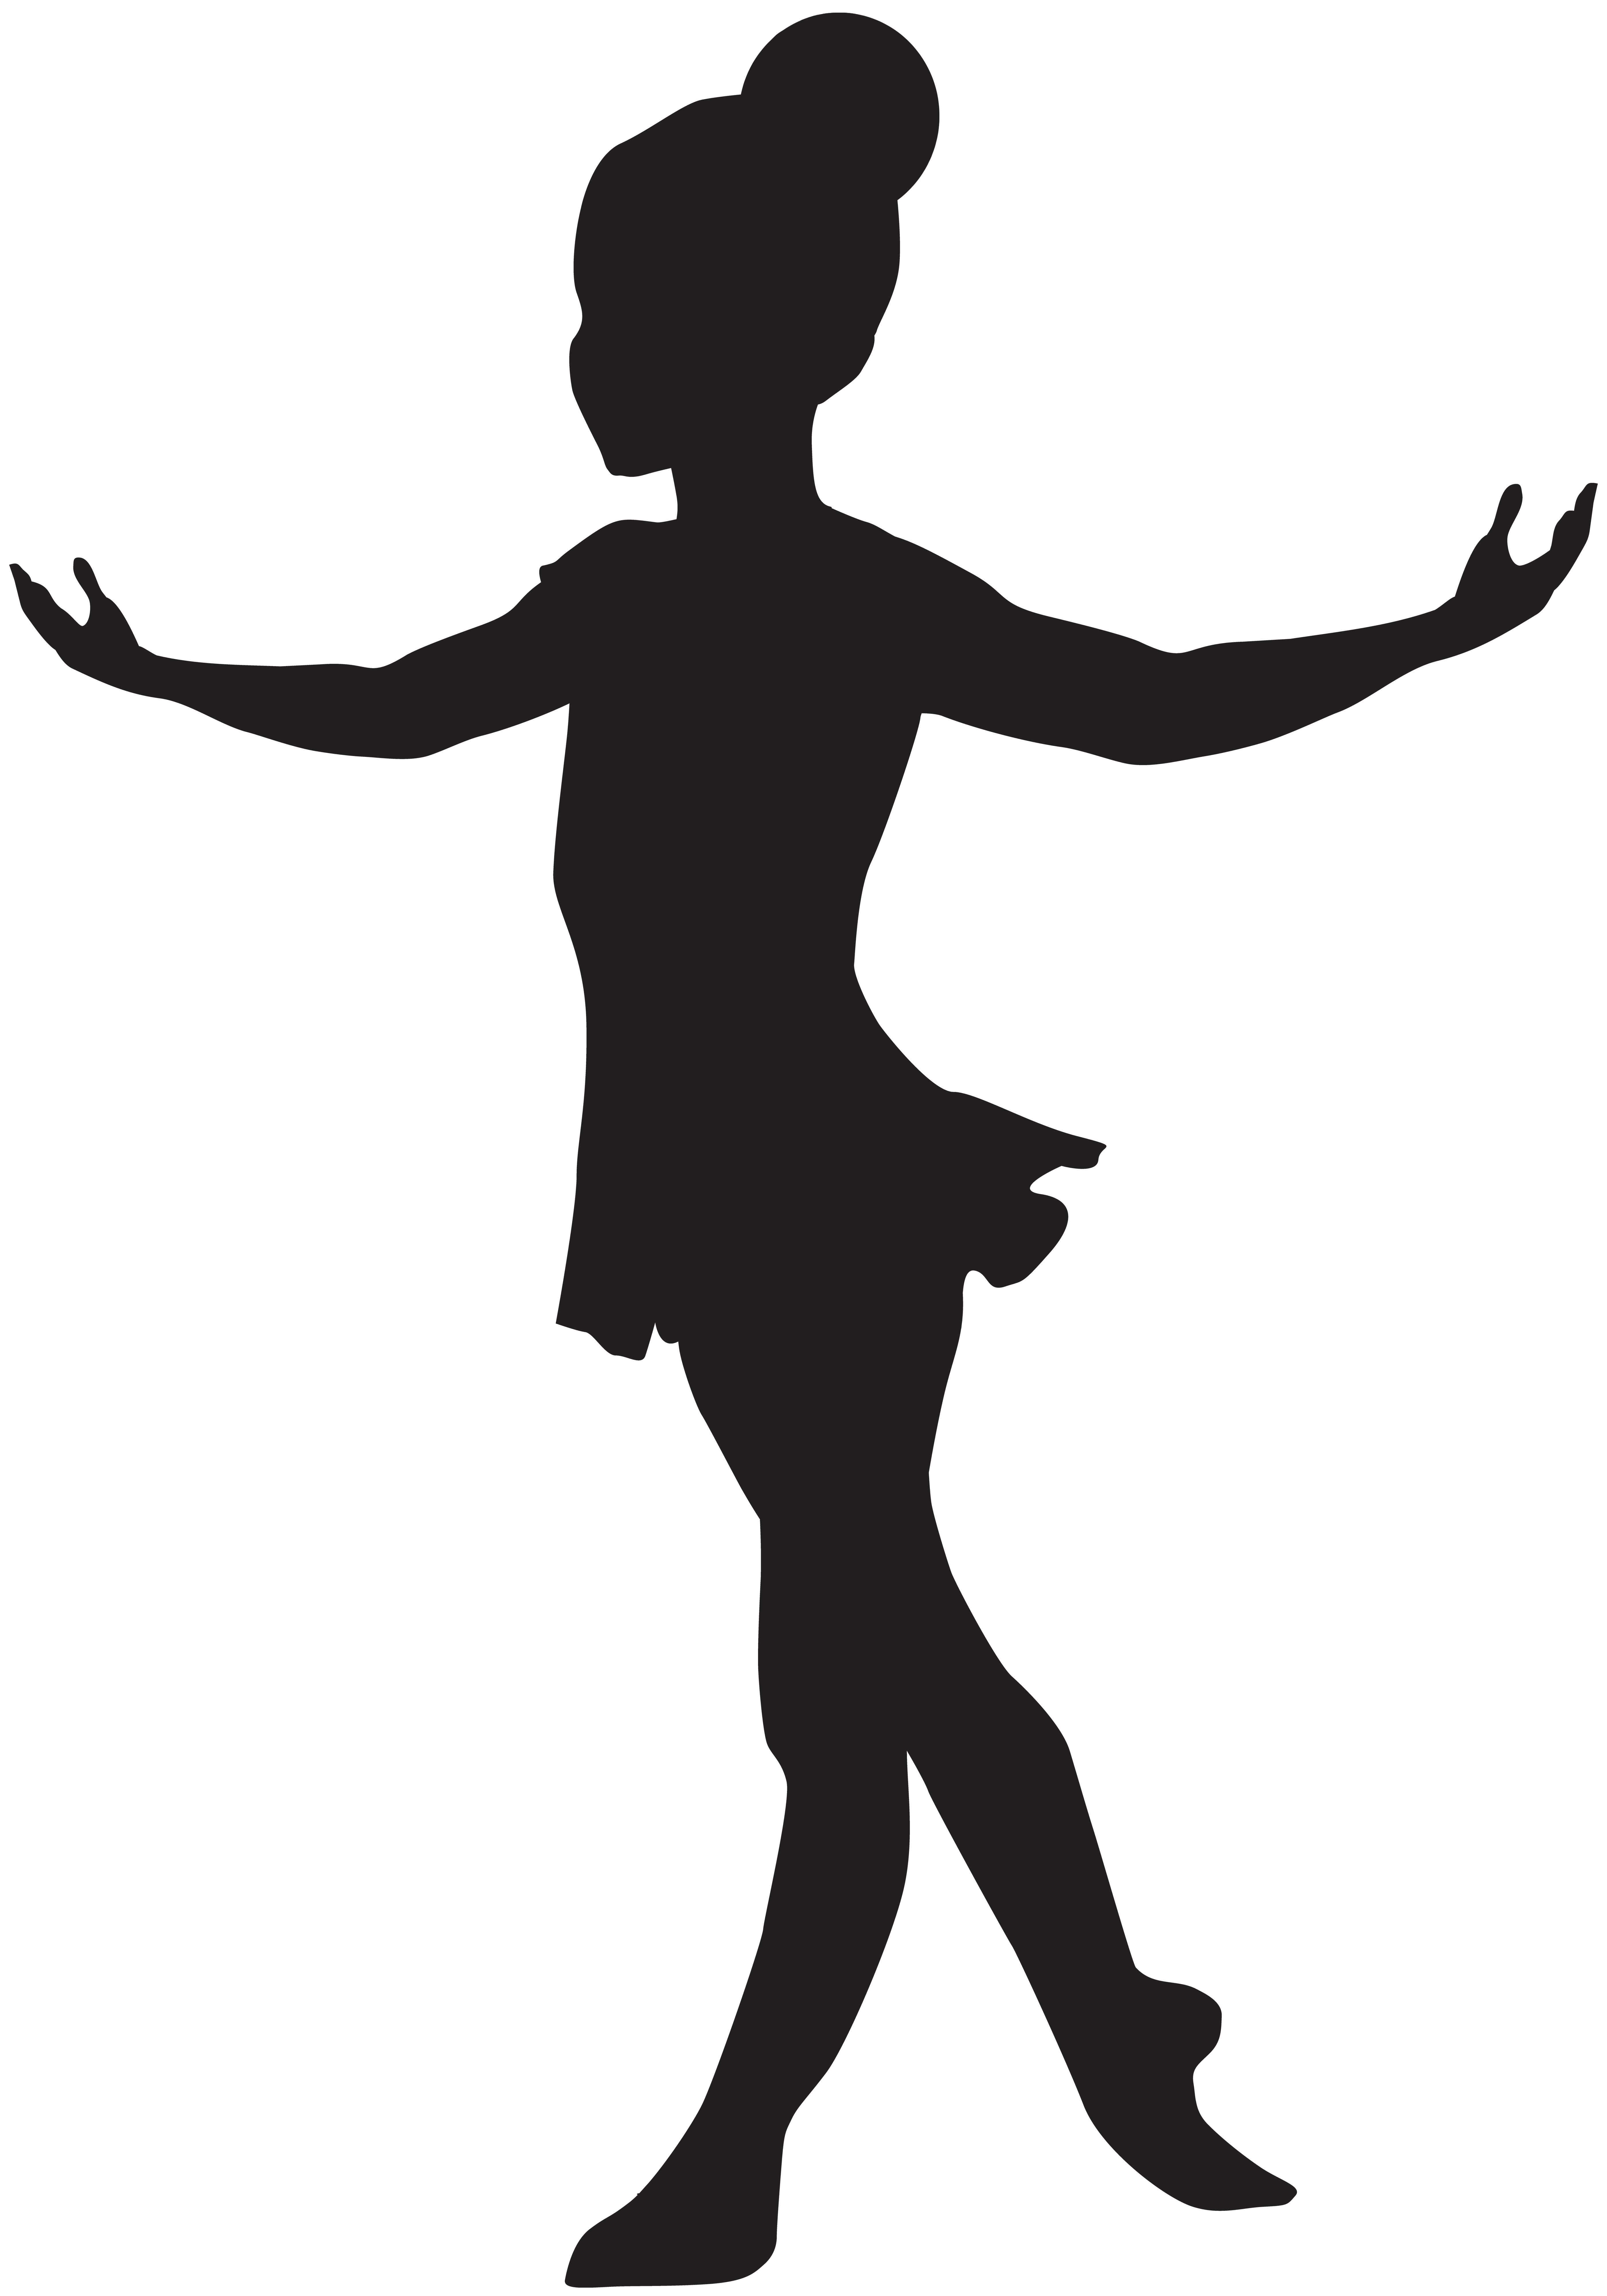 Ballerina Silhouette Template At GetDrawings Free Download